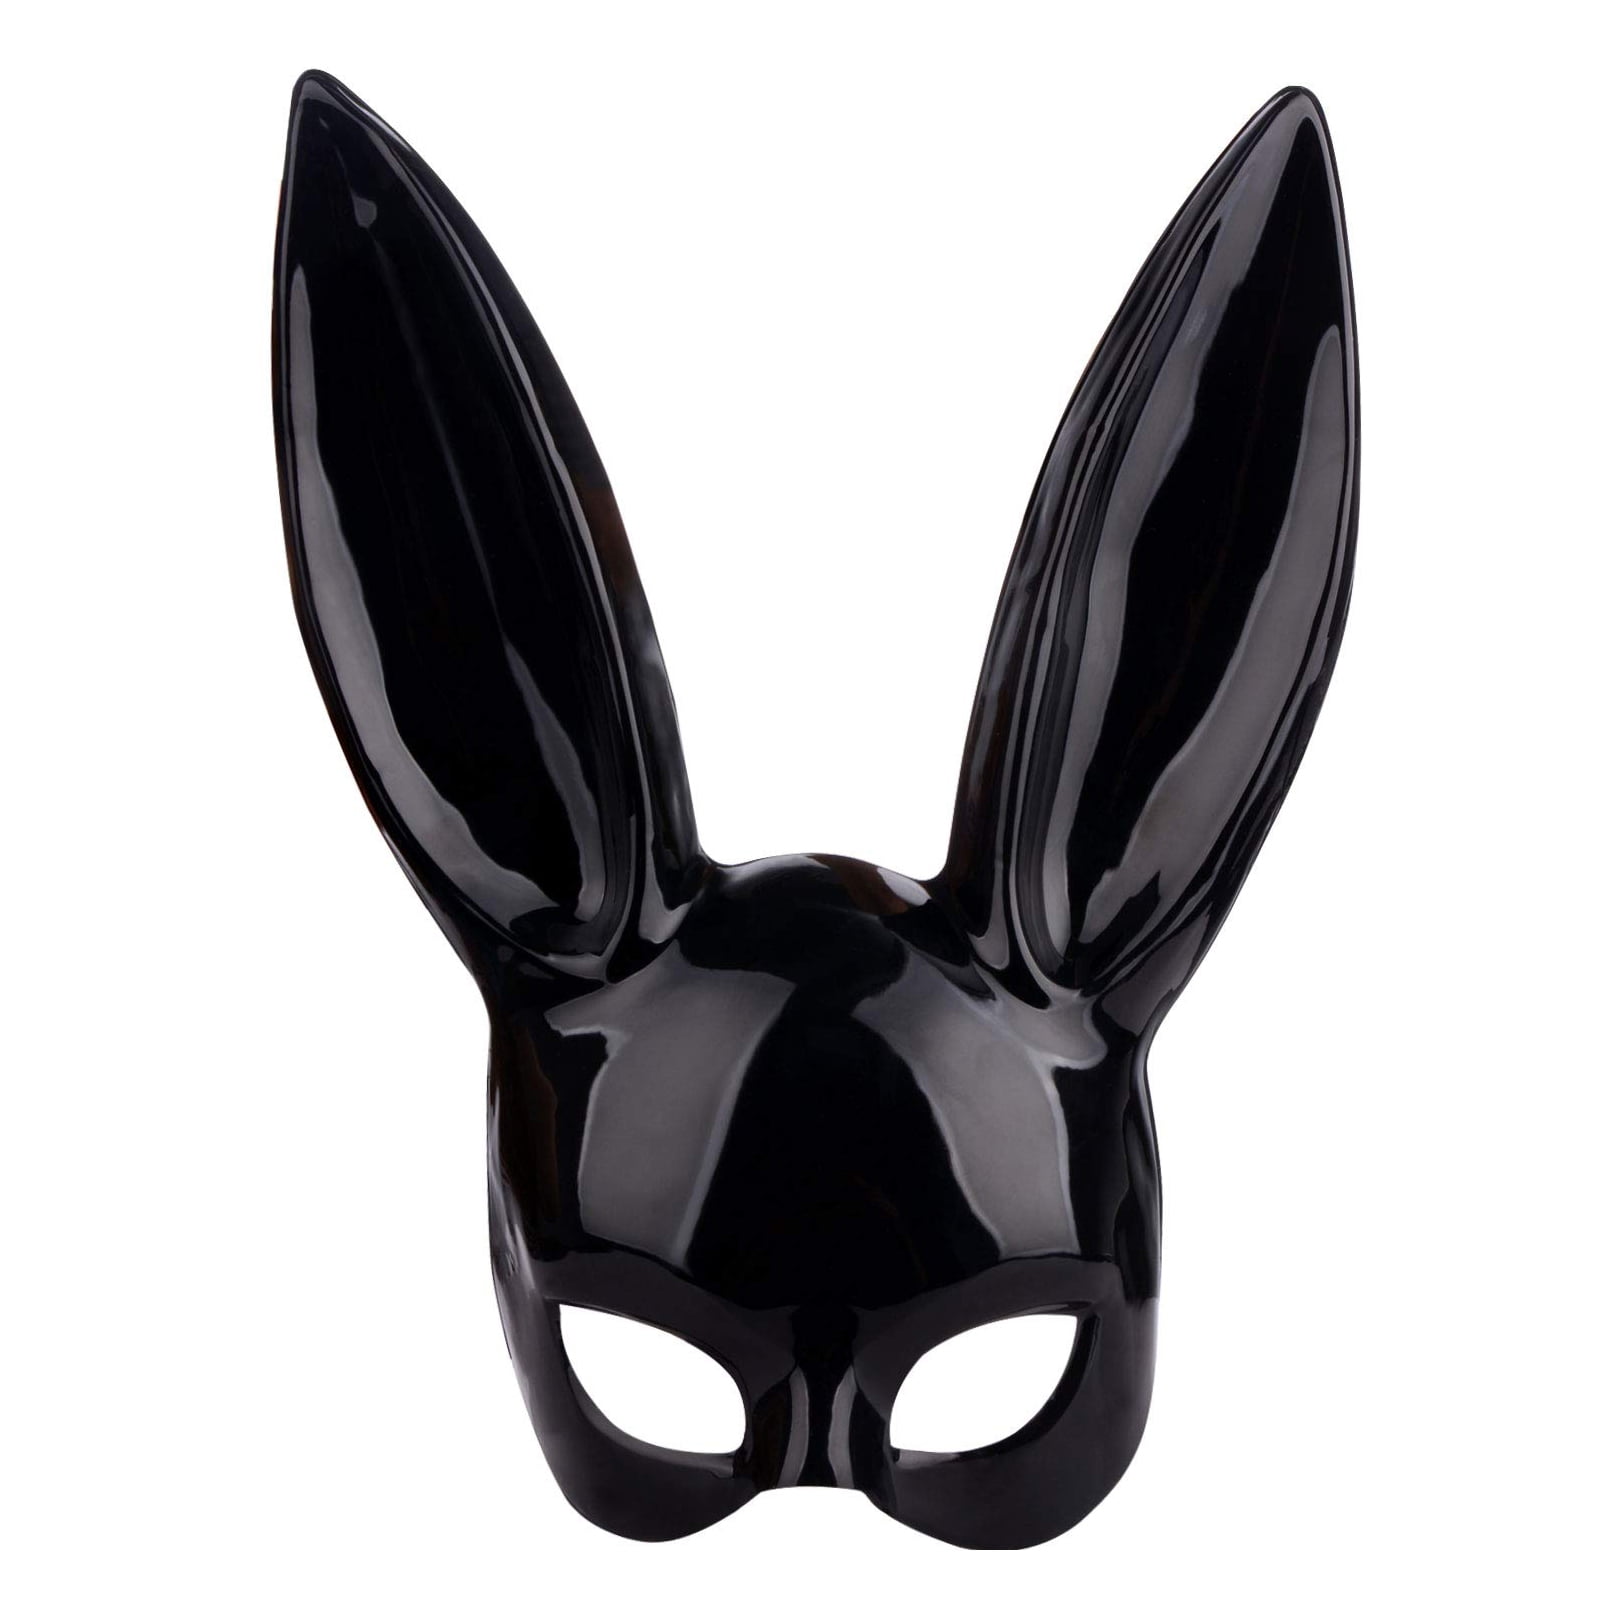 FunMove Halloween Cosplay Bunny Mask Black Masquerade Mask Rabbit Eyemask with Ears Bunny Mask for Halloween Party Costume Cosplay Night Club Party Accessory 